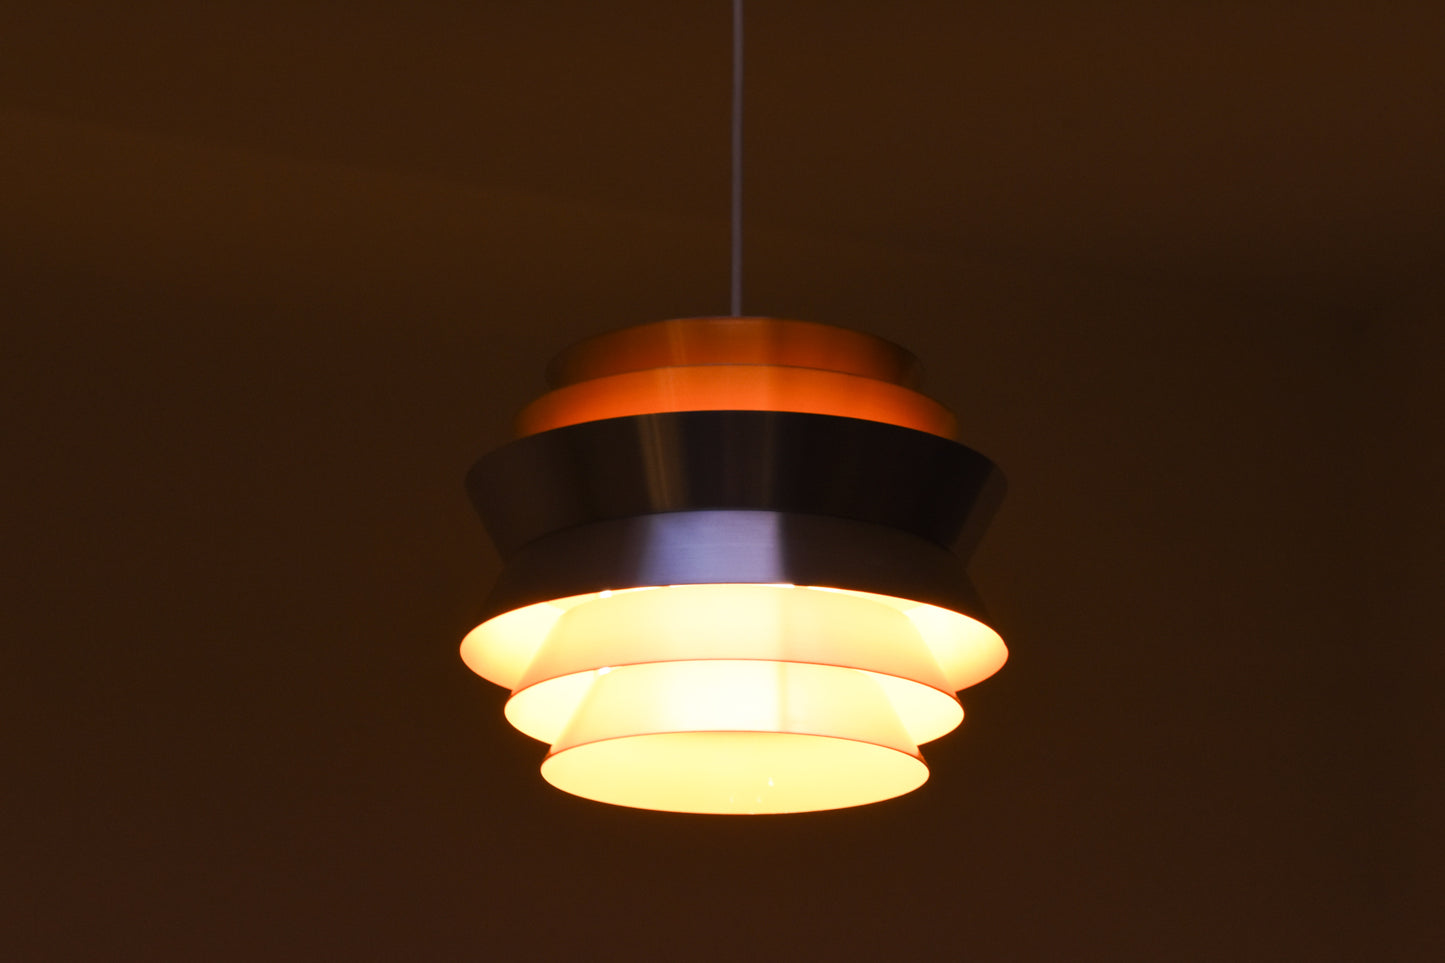 1960s ceiling lamp by Carl Thore